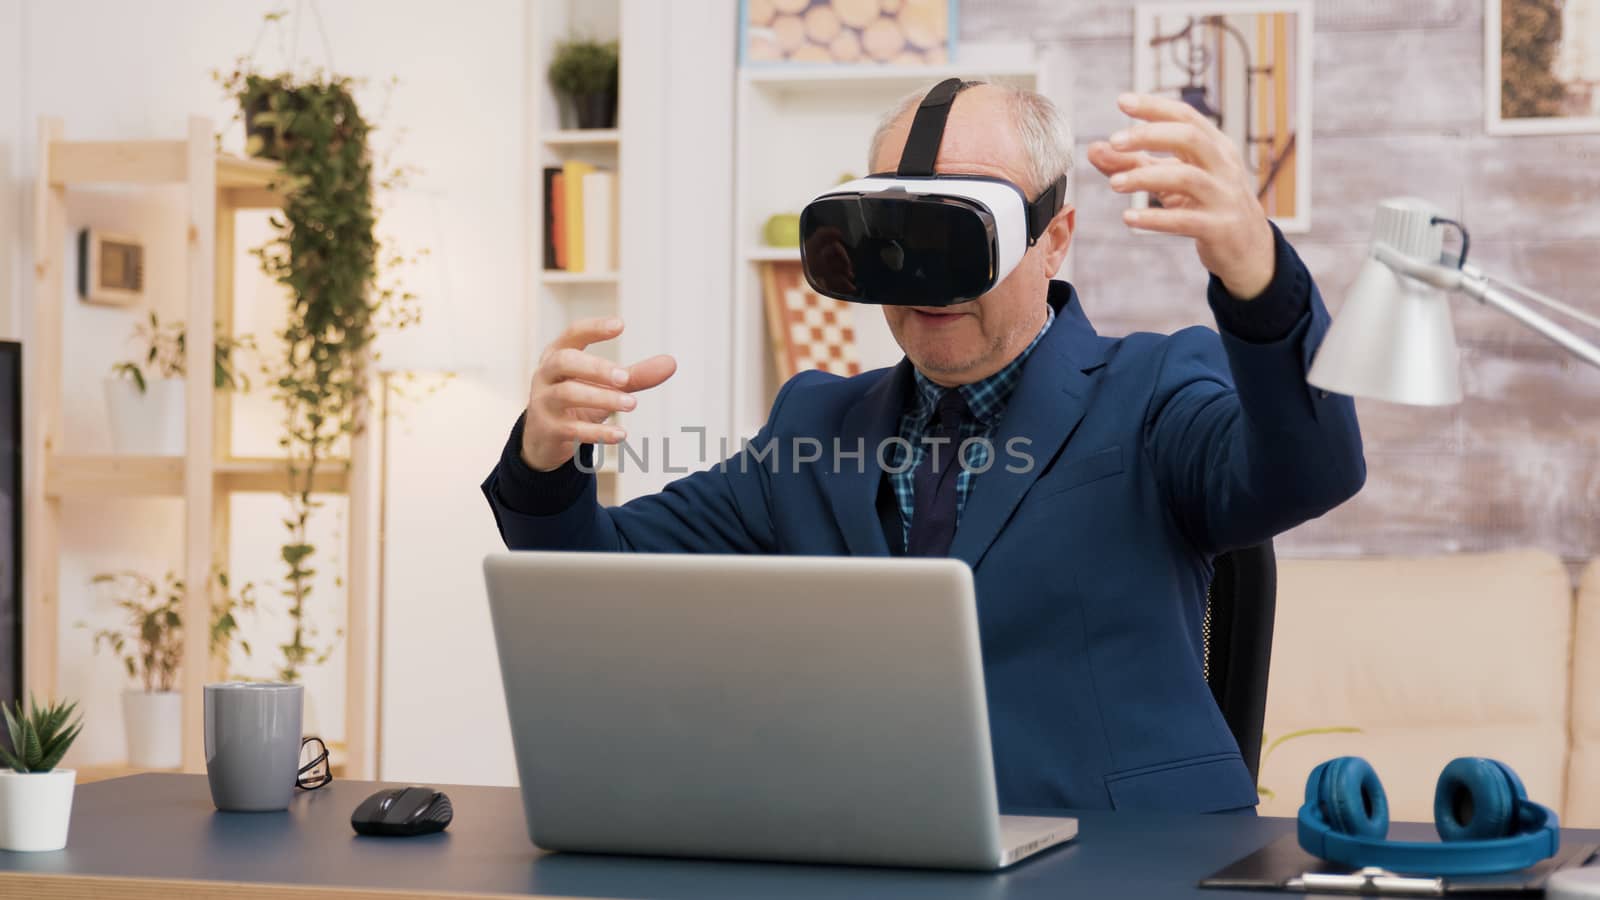 Retired man experiencing virtual reality using vr headset by DCStudio